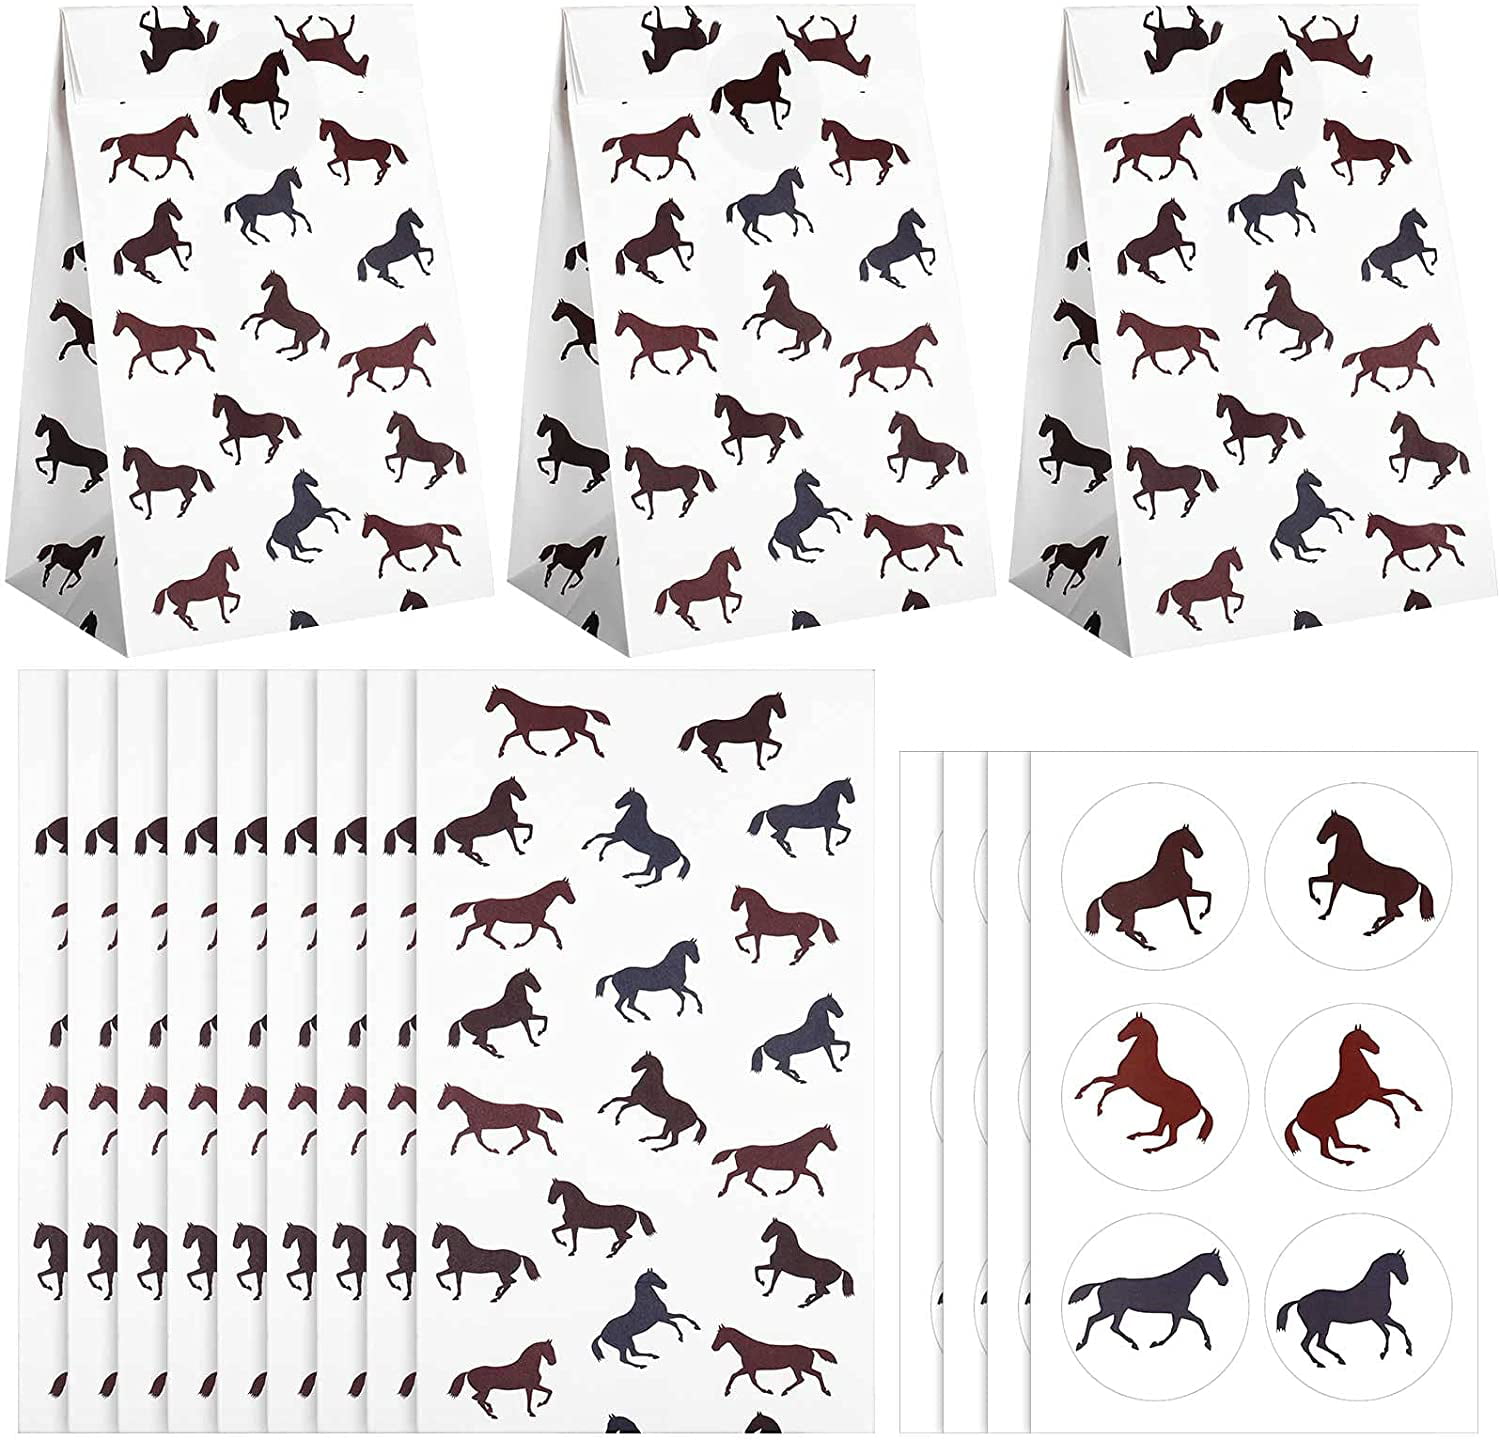 24 Packs Pony Ponies Stickers Party Bag Fillers Favours 